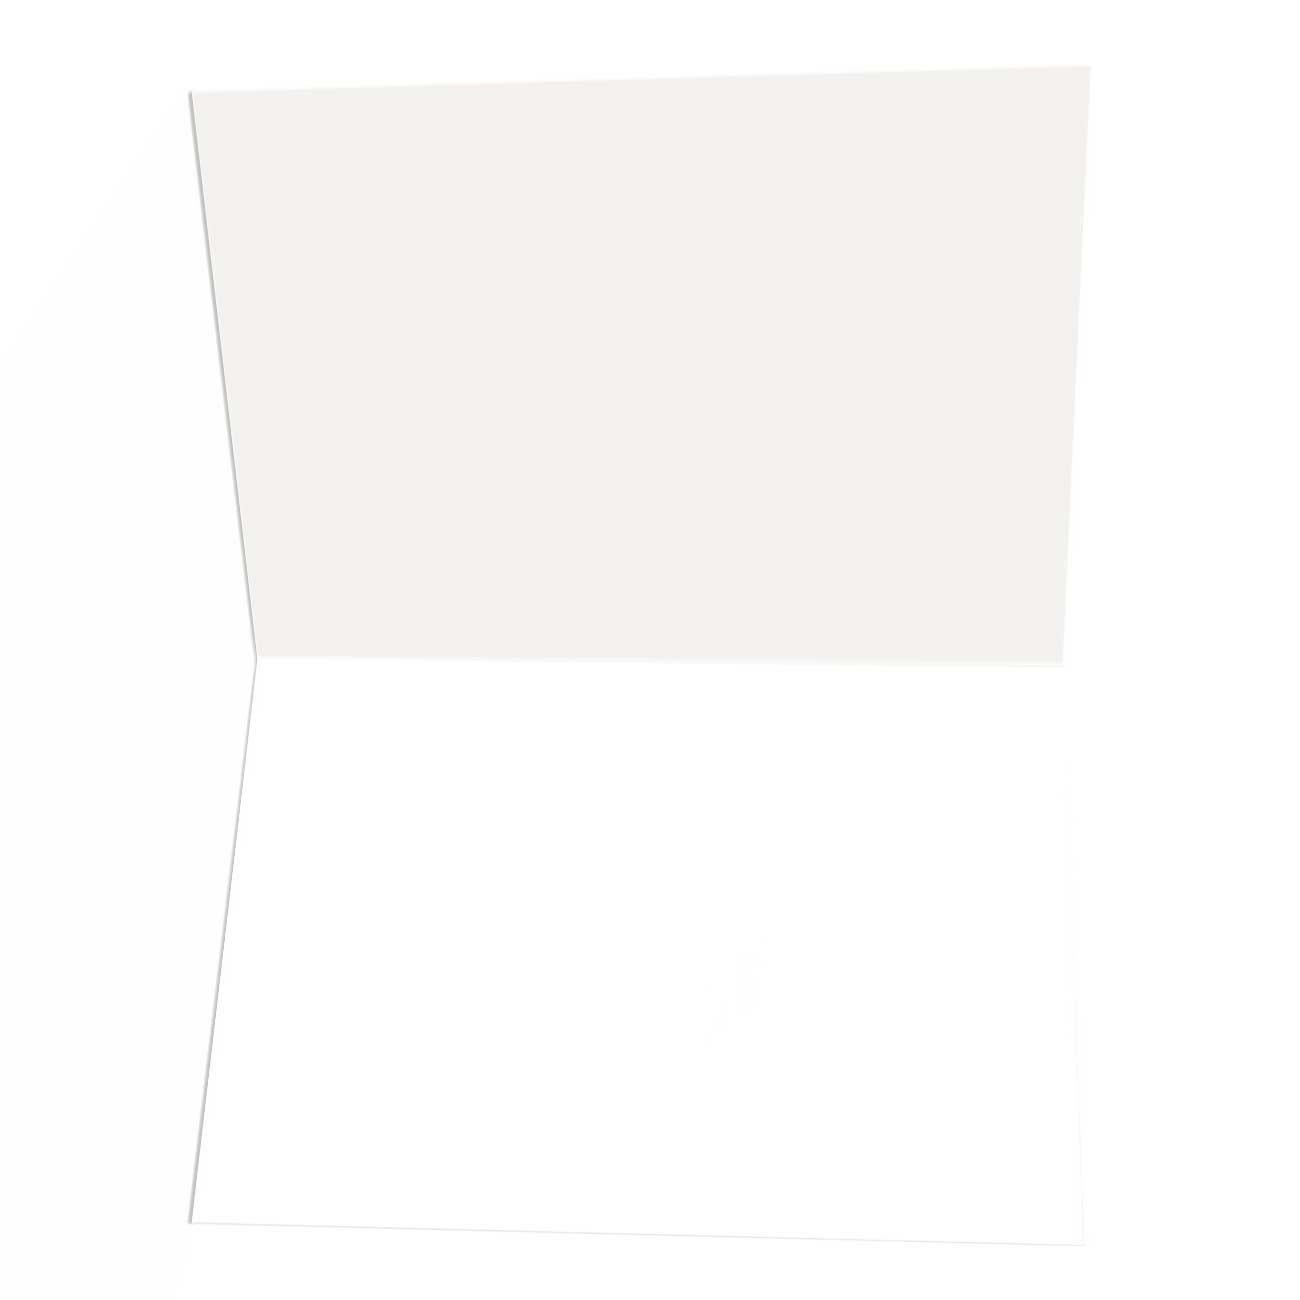 Beach Blank Note Cards - 10 Boxed Cards and Envelopes - 14403 